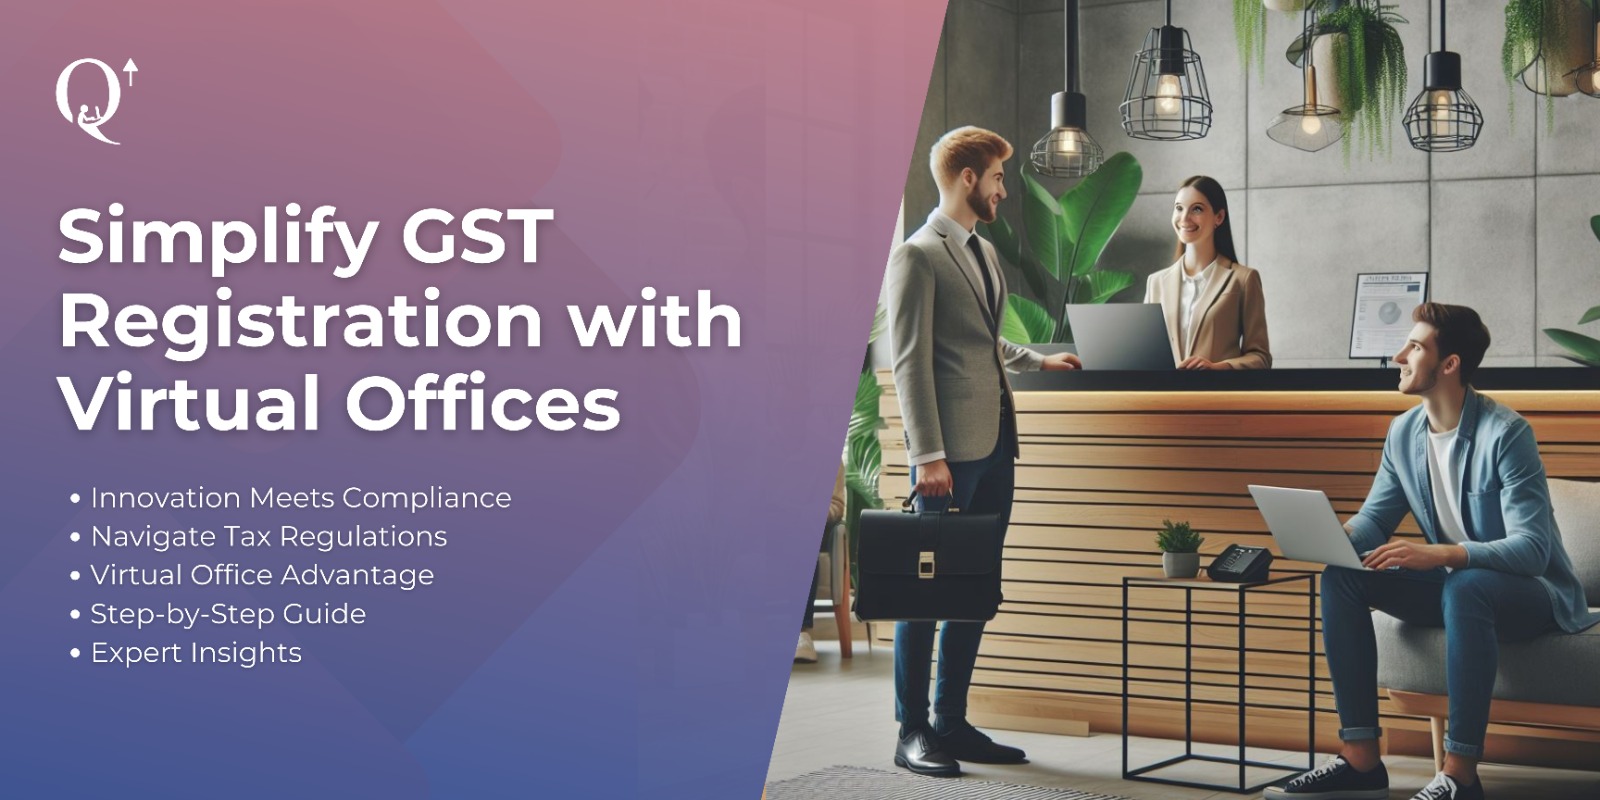 Virtual Office GST Registration in India